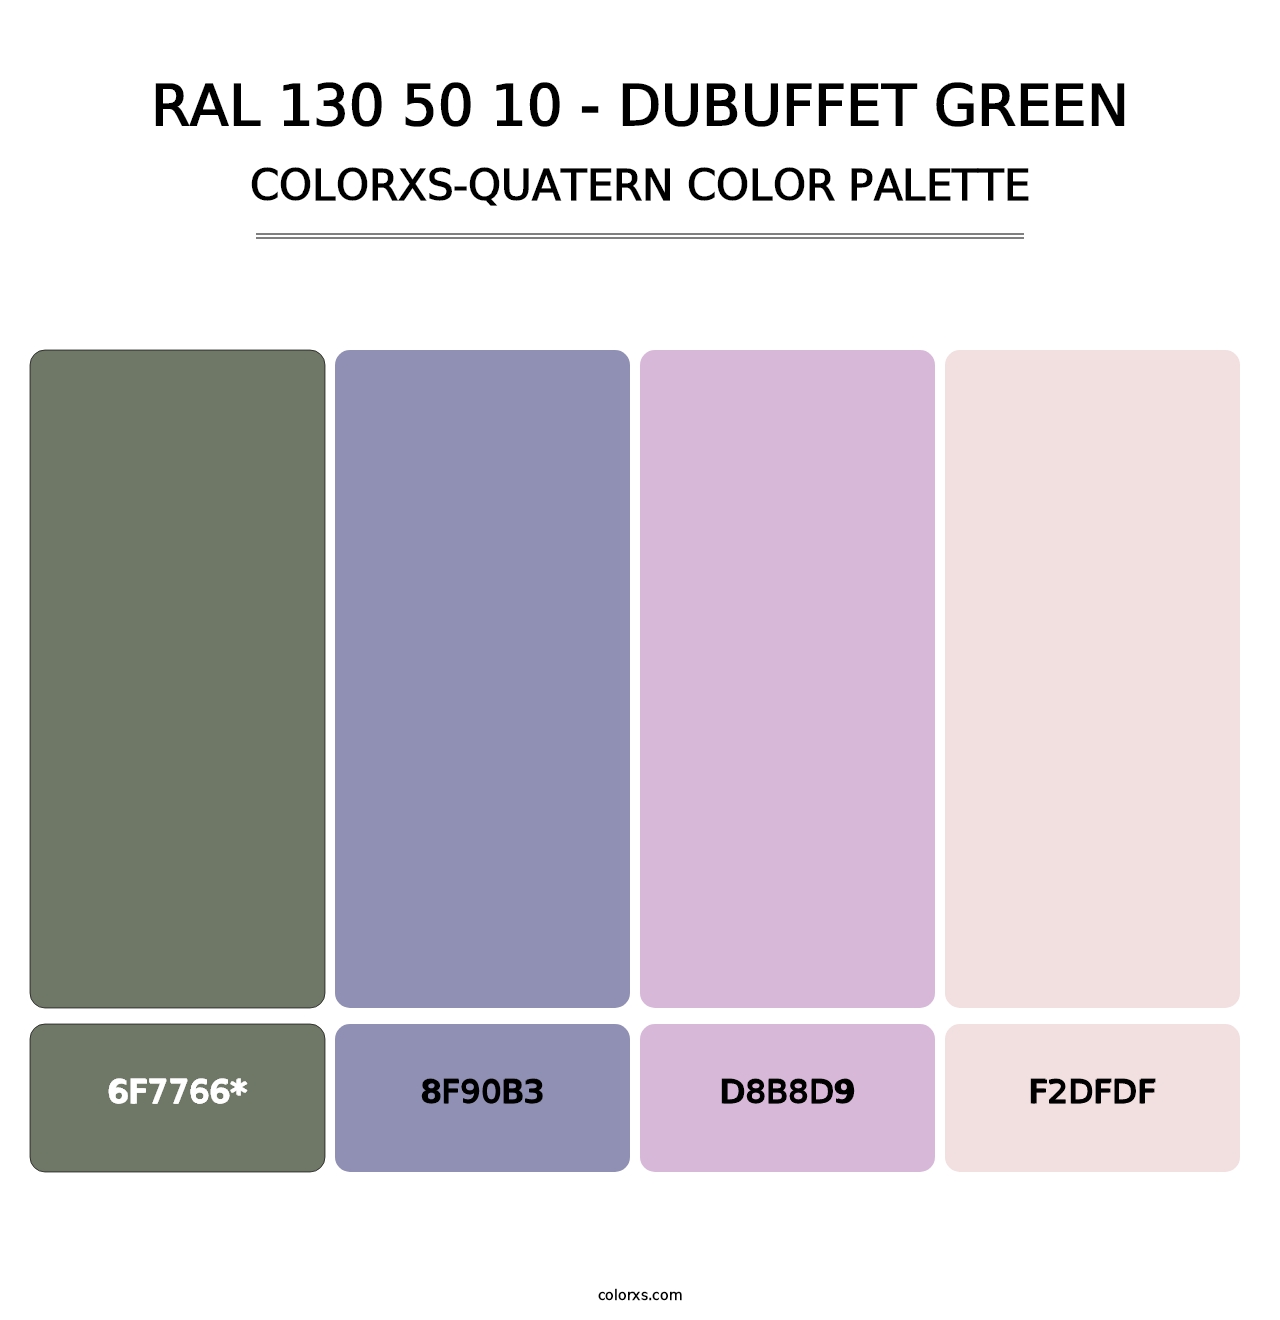 RAL 130 50 10 - Dubuffet Green - Colorxs Quatern Palette